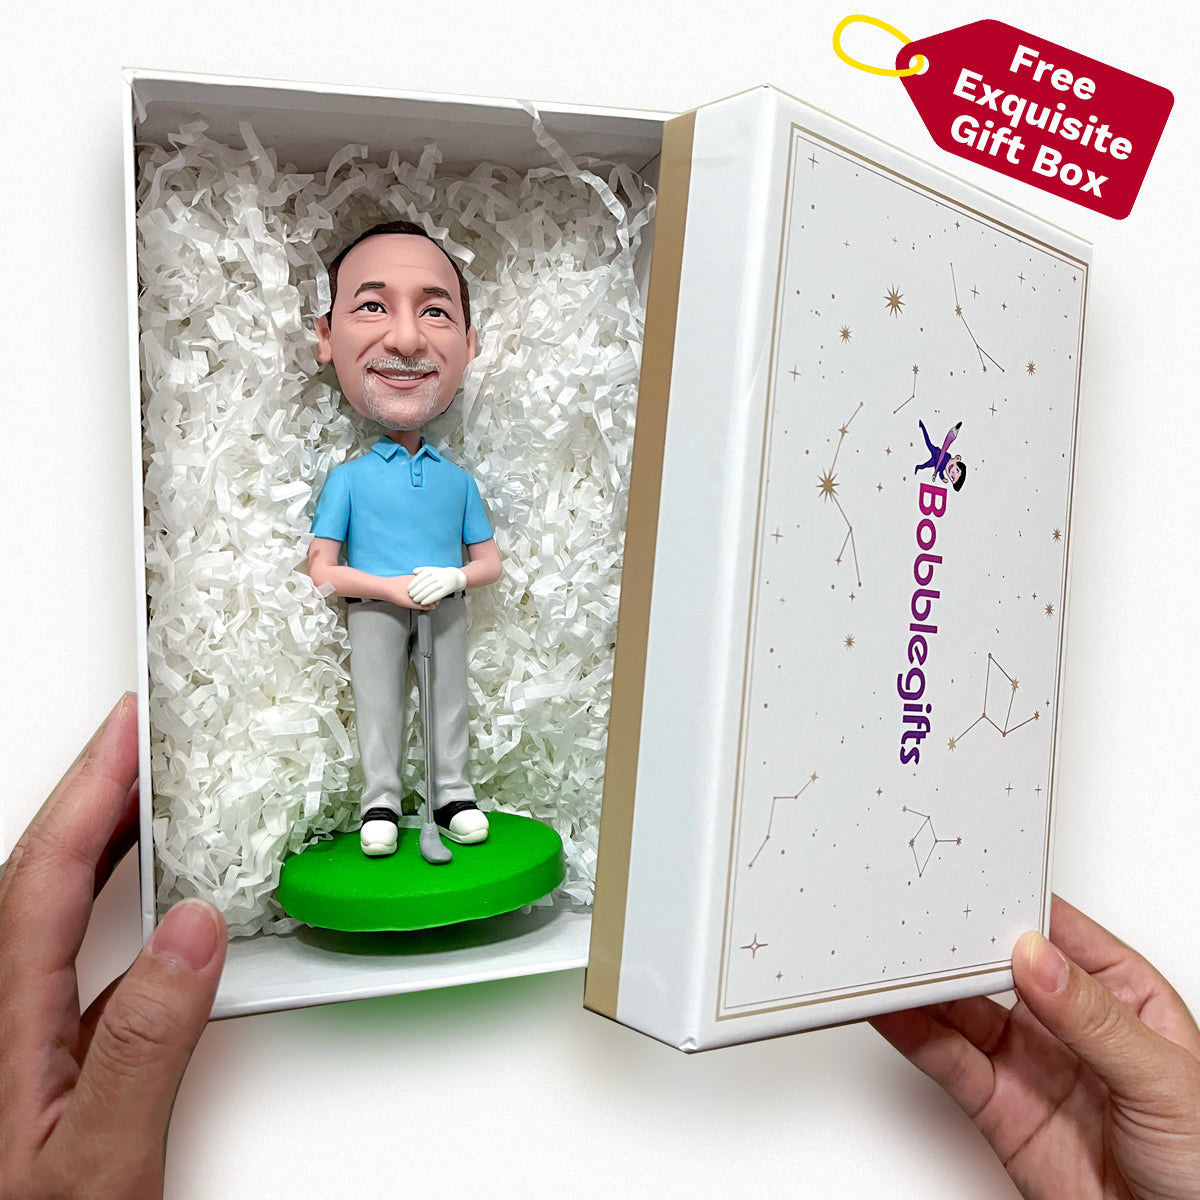 Custom Golf Man Bobblehead For Father's Day